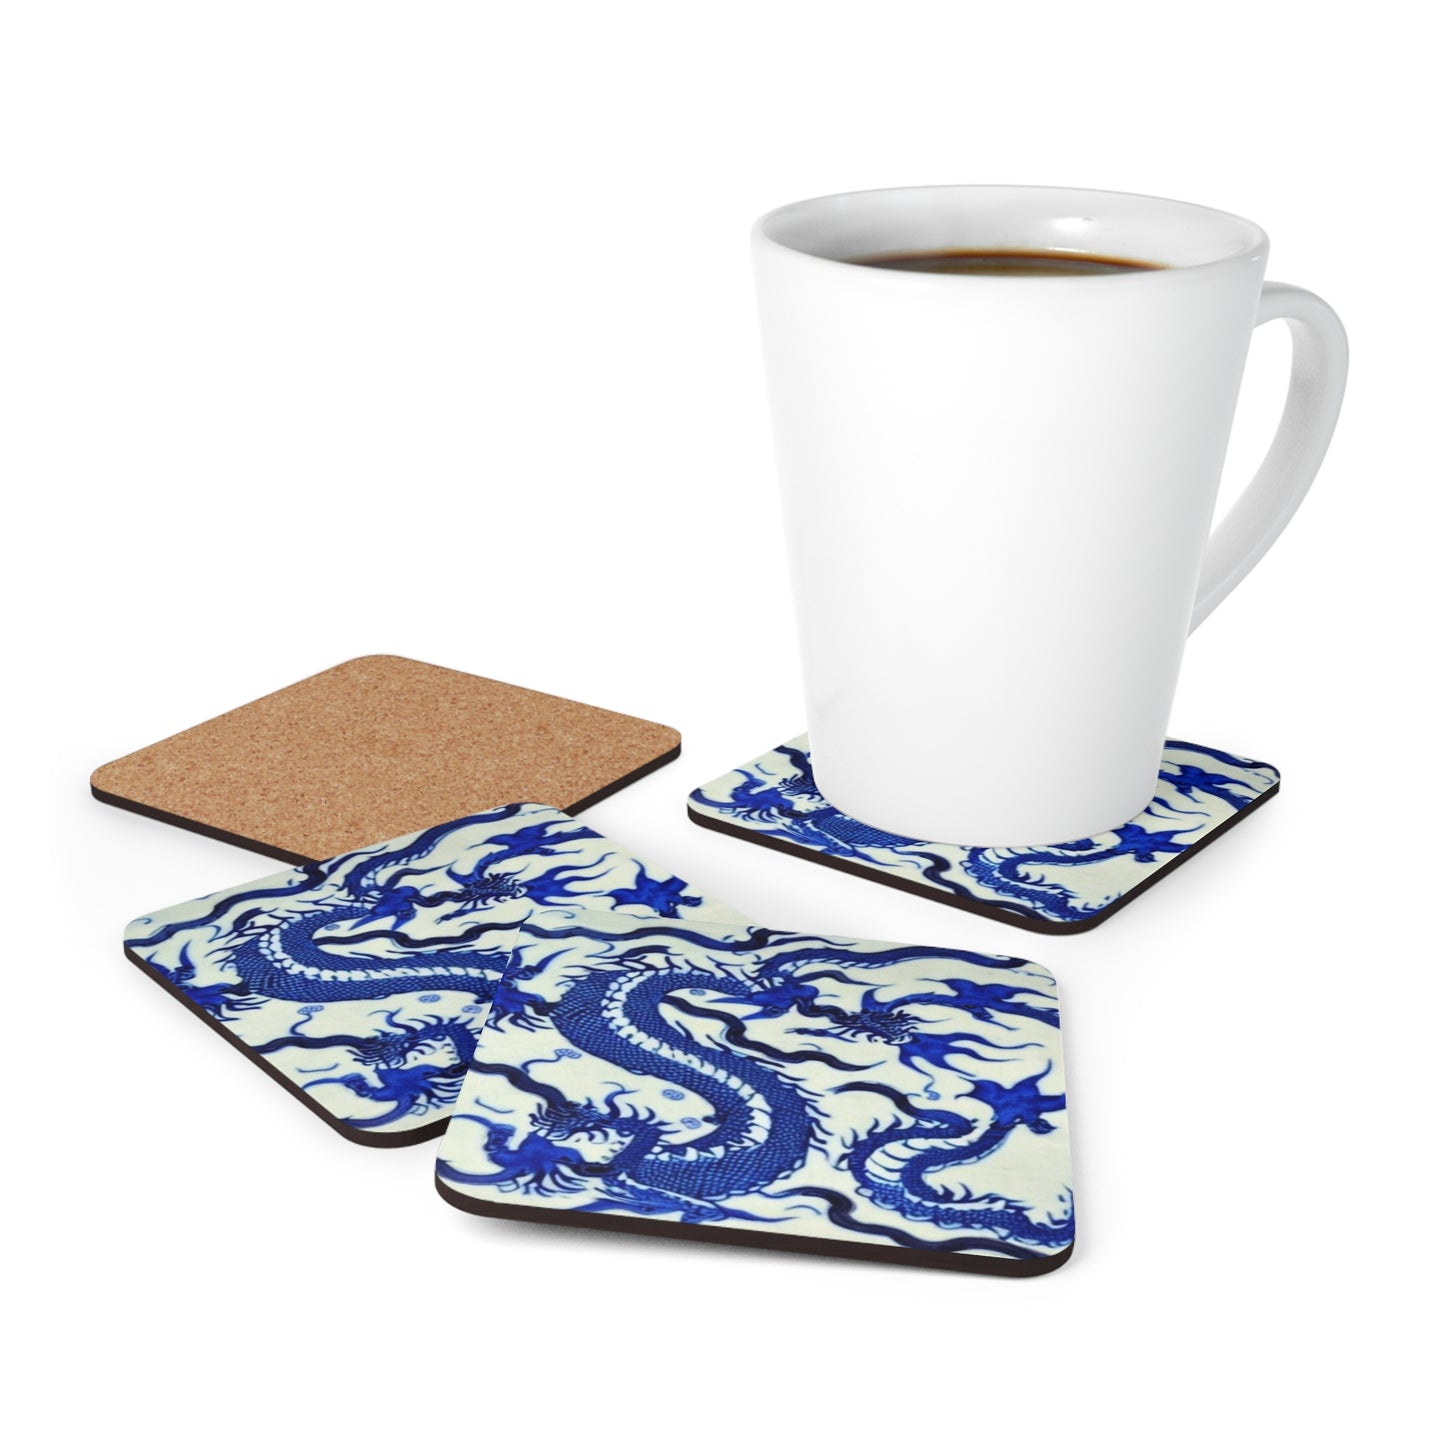 Chinese Dragon Ming Dynasty Blue and White Antique Pattern Historical Cocktail Party Entertaining Corkwood Coaster Set